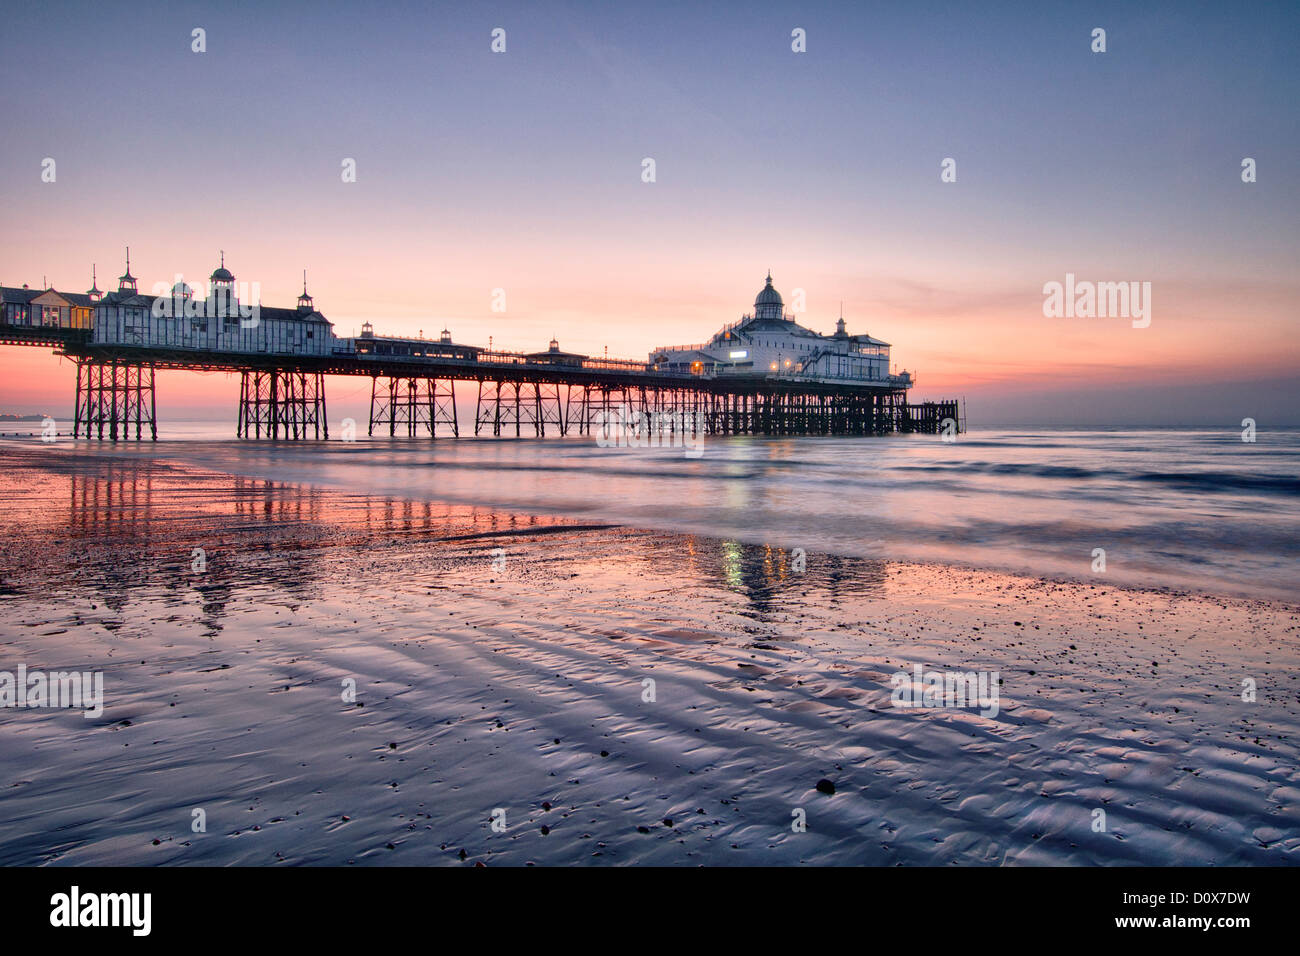 A beautiful sunrise at Eastbourne Pier, East Sussex, England Stock Photo